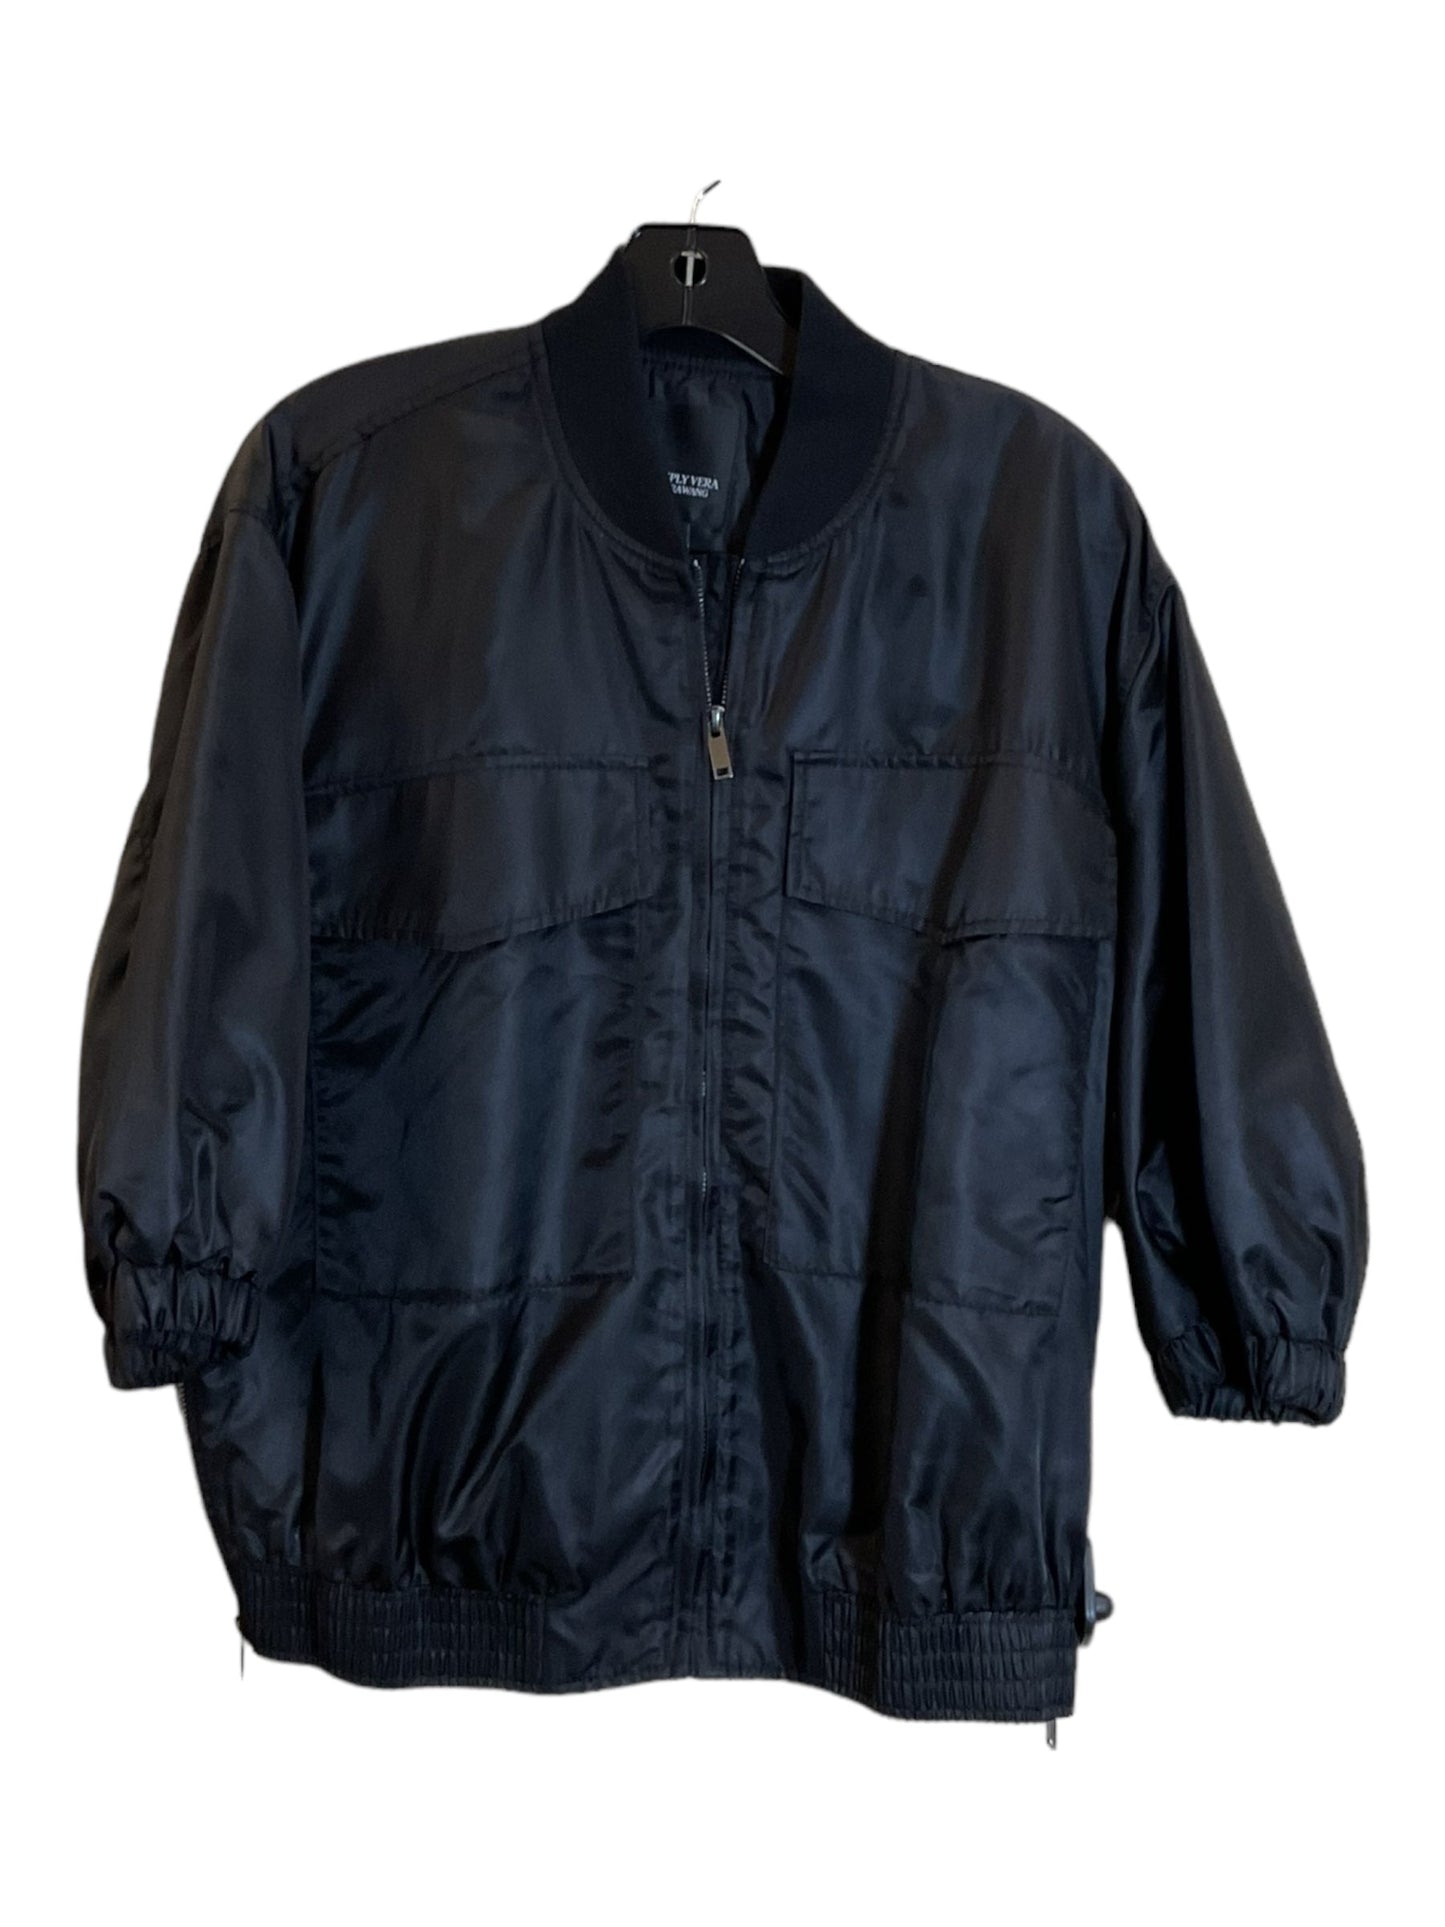 Black Jacket Other Simply Vera, Size M